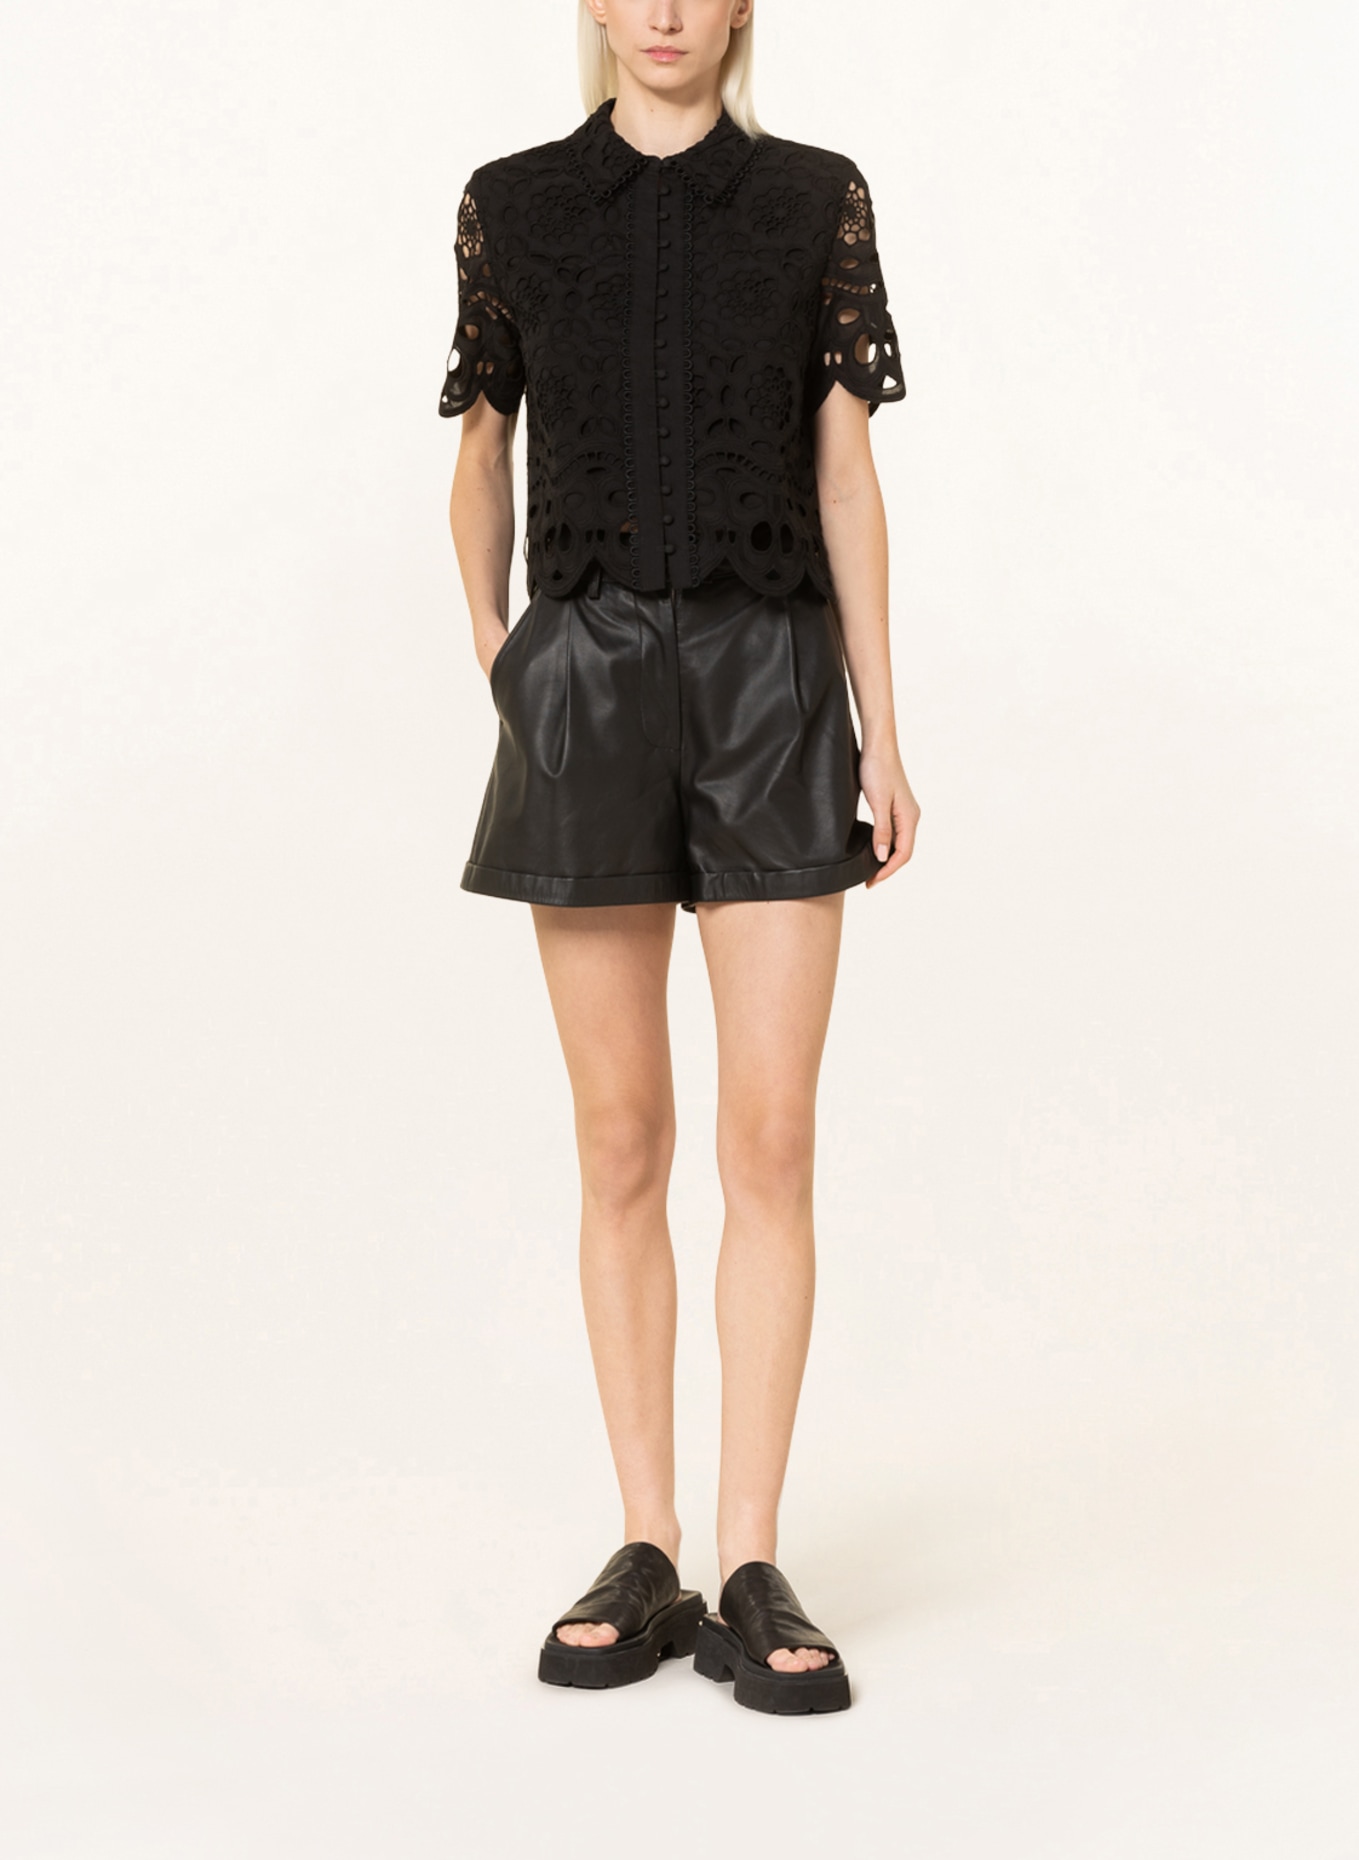 MRS & HUGS Shirt blouse made of lace, Color: BLACK (Image 2)